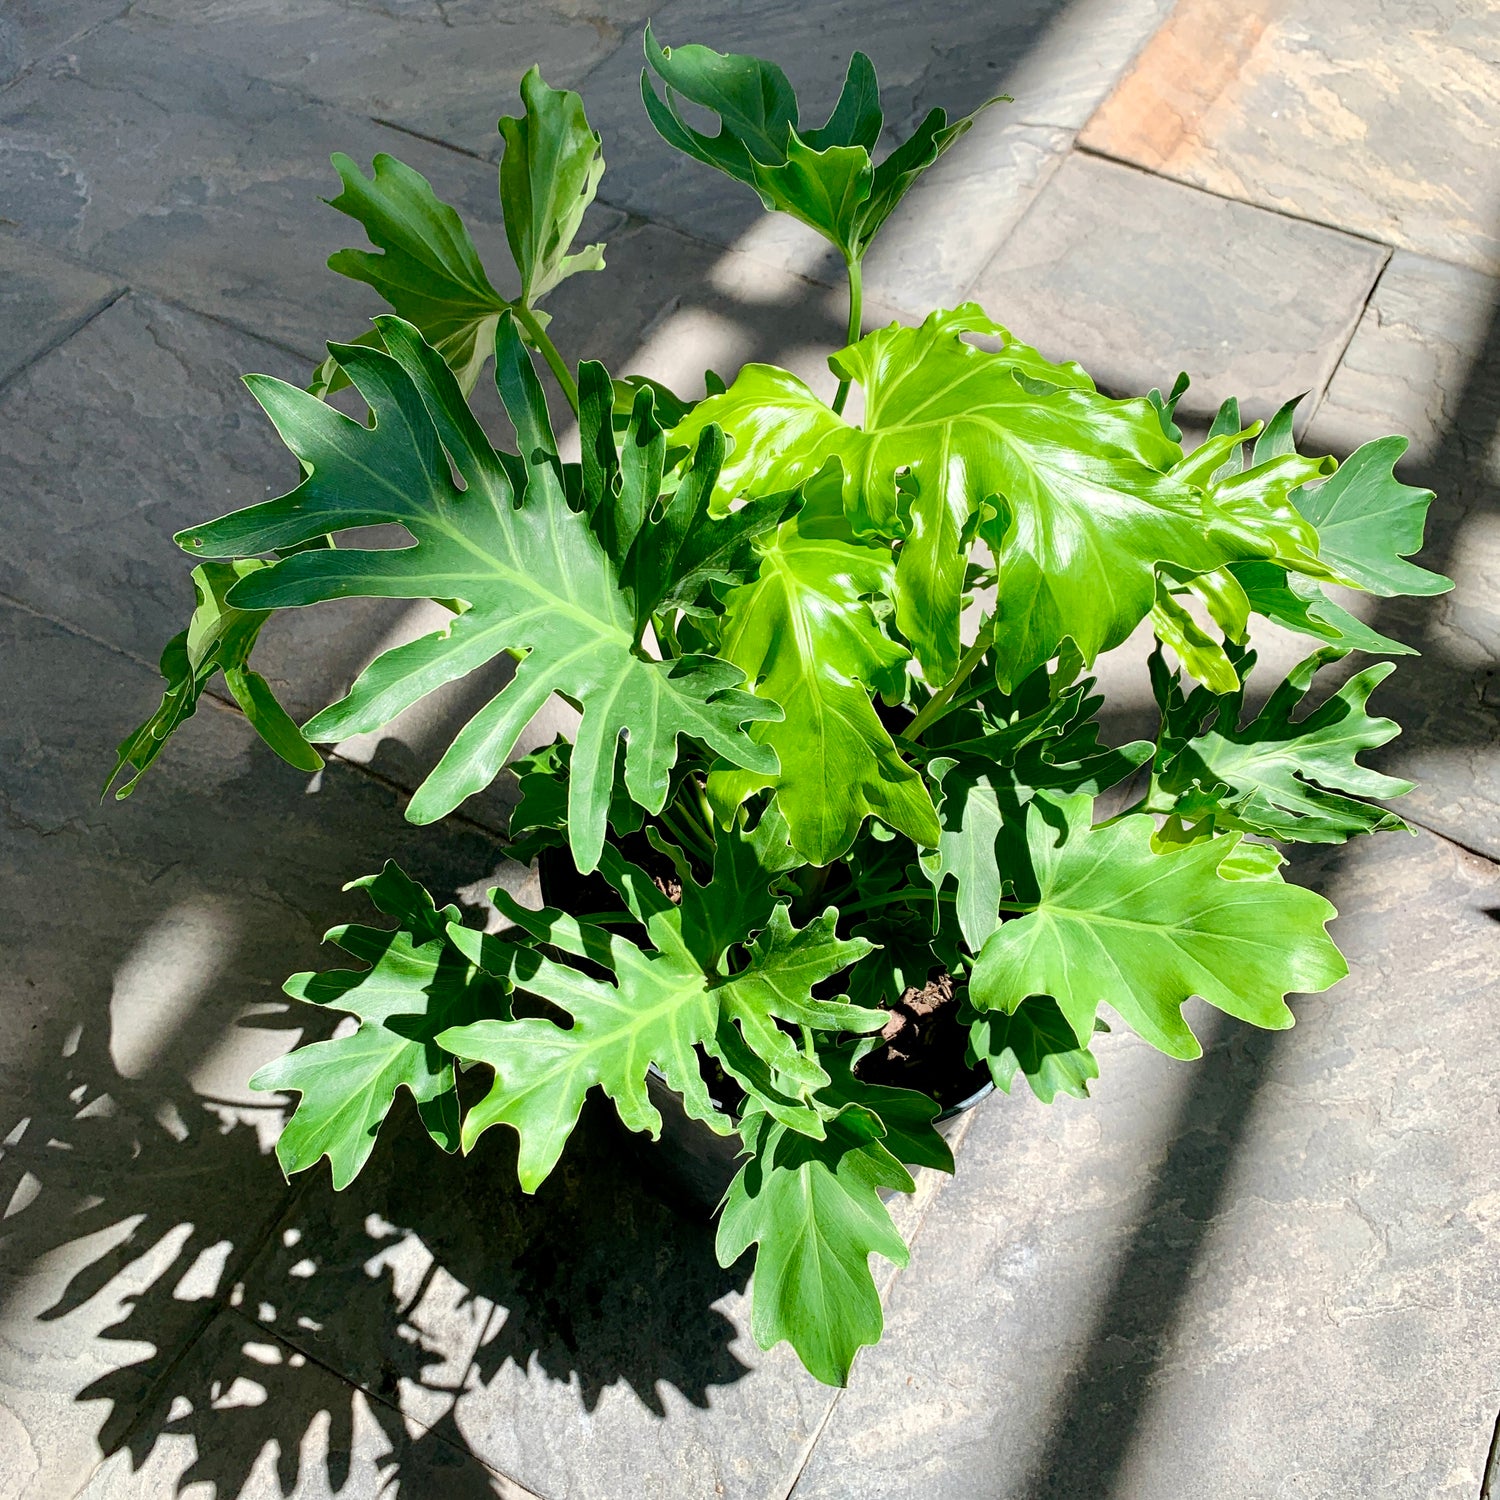 Philodendron selloum - Hope Philodendron